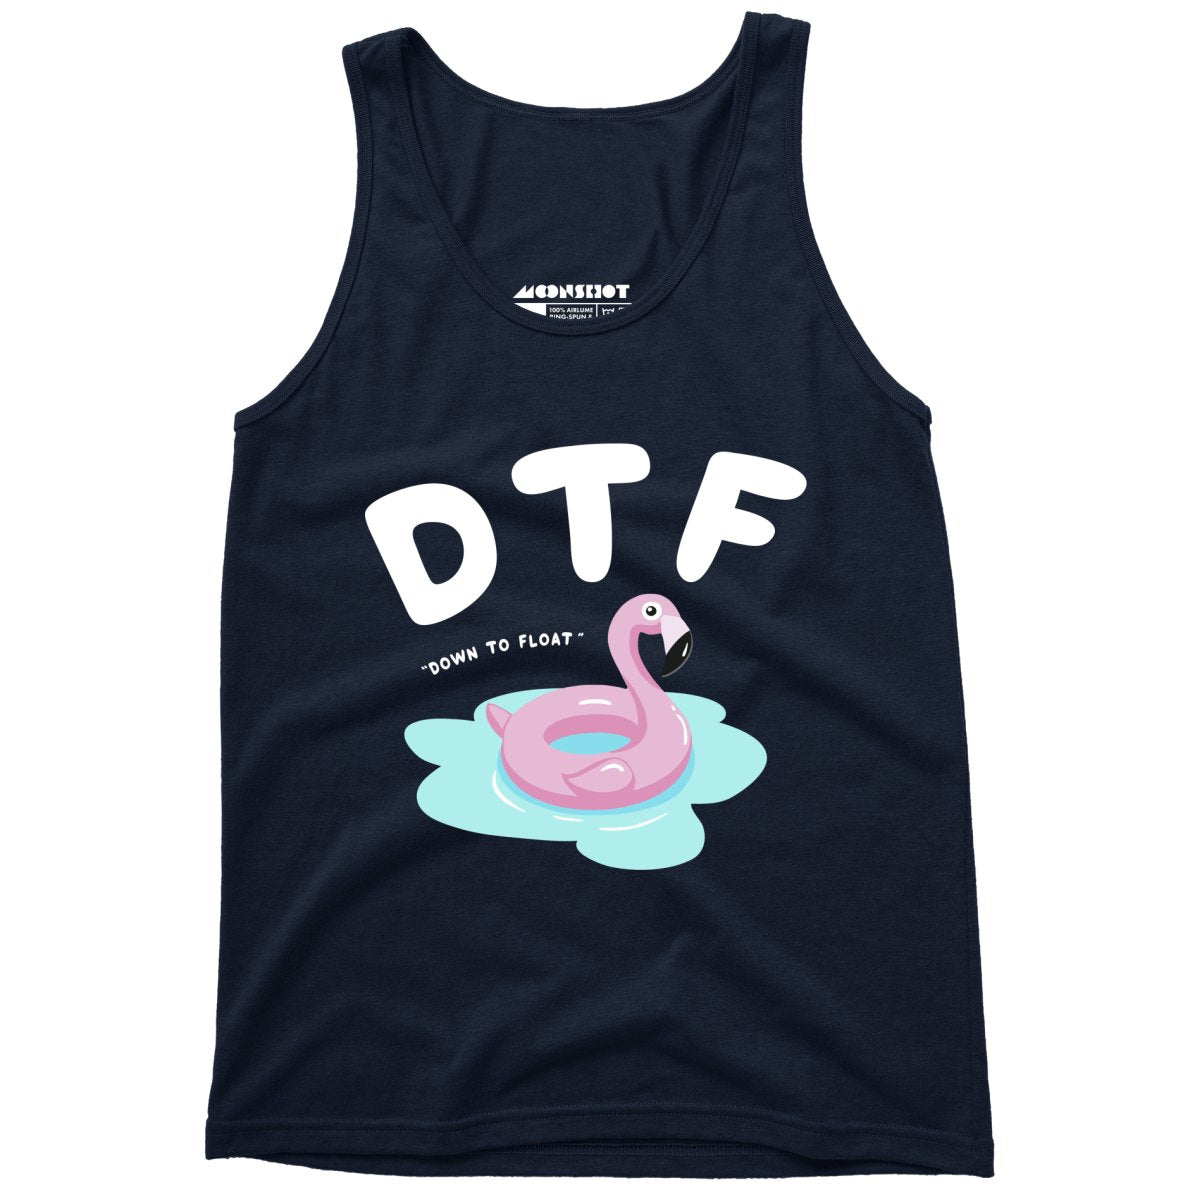 Down to Float - Unisex Tank Top